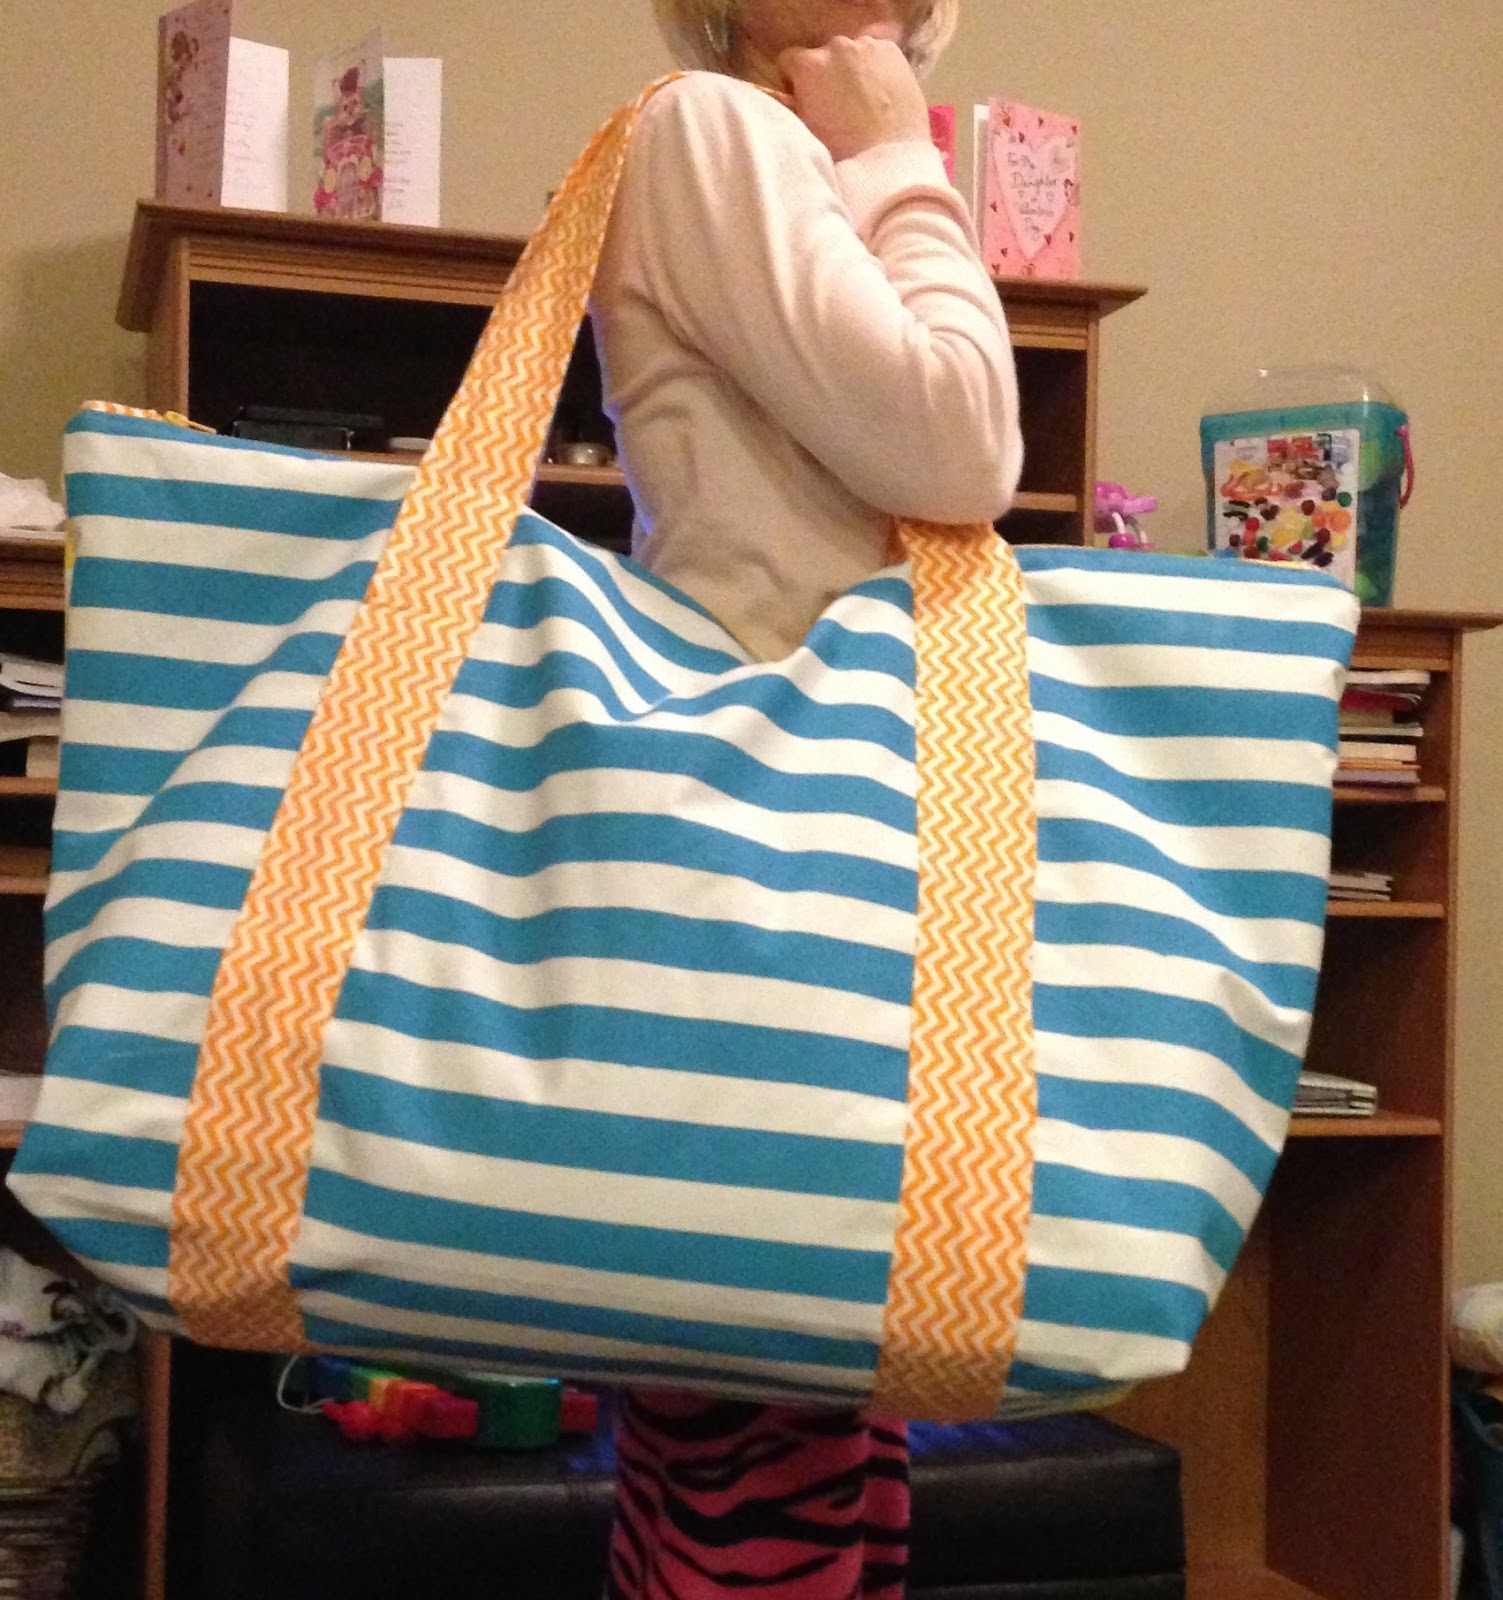 Handmade by Linds...Introducing the offspring: An oversized beach tote. Aka, a MAMMOTH bag!